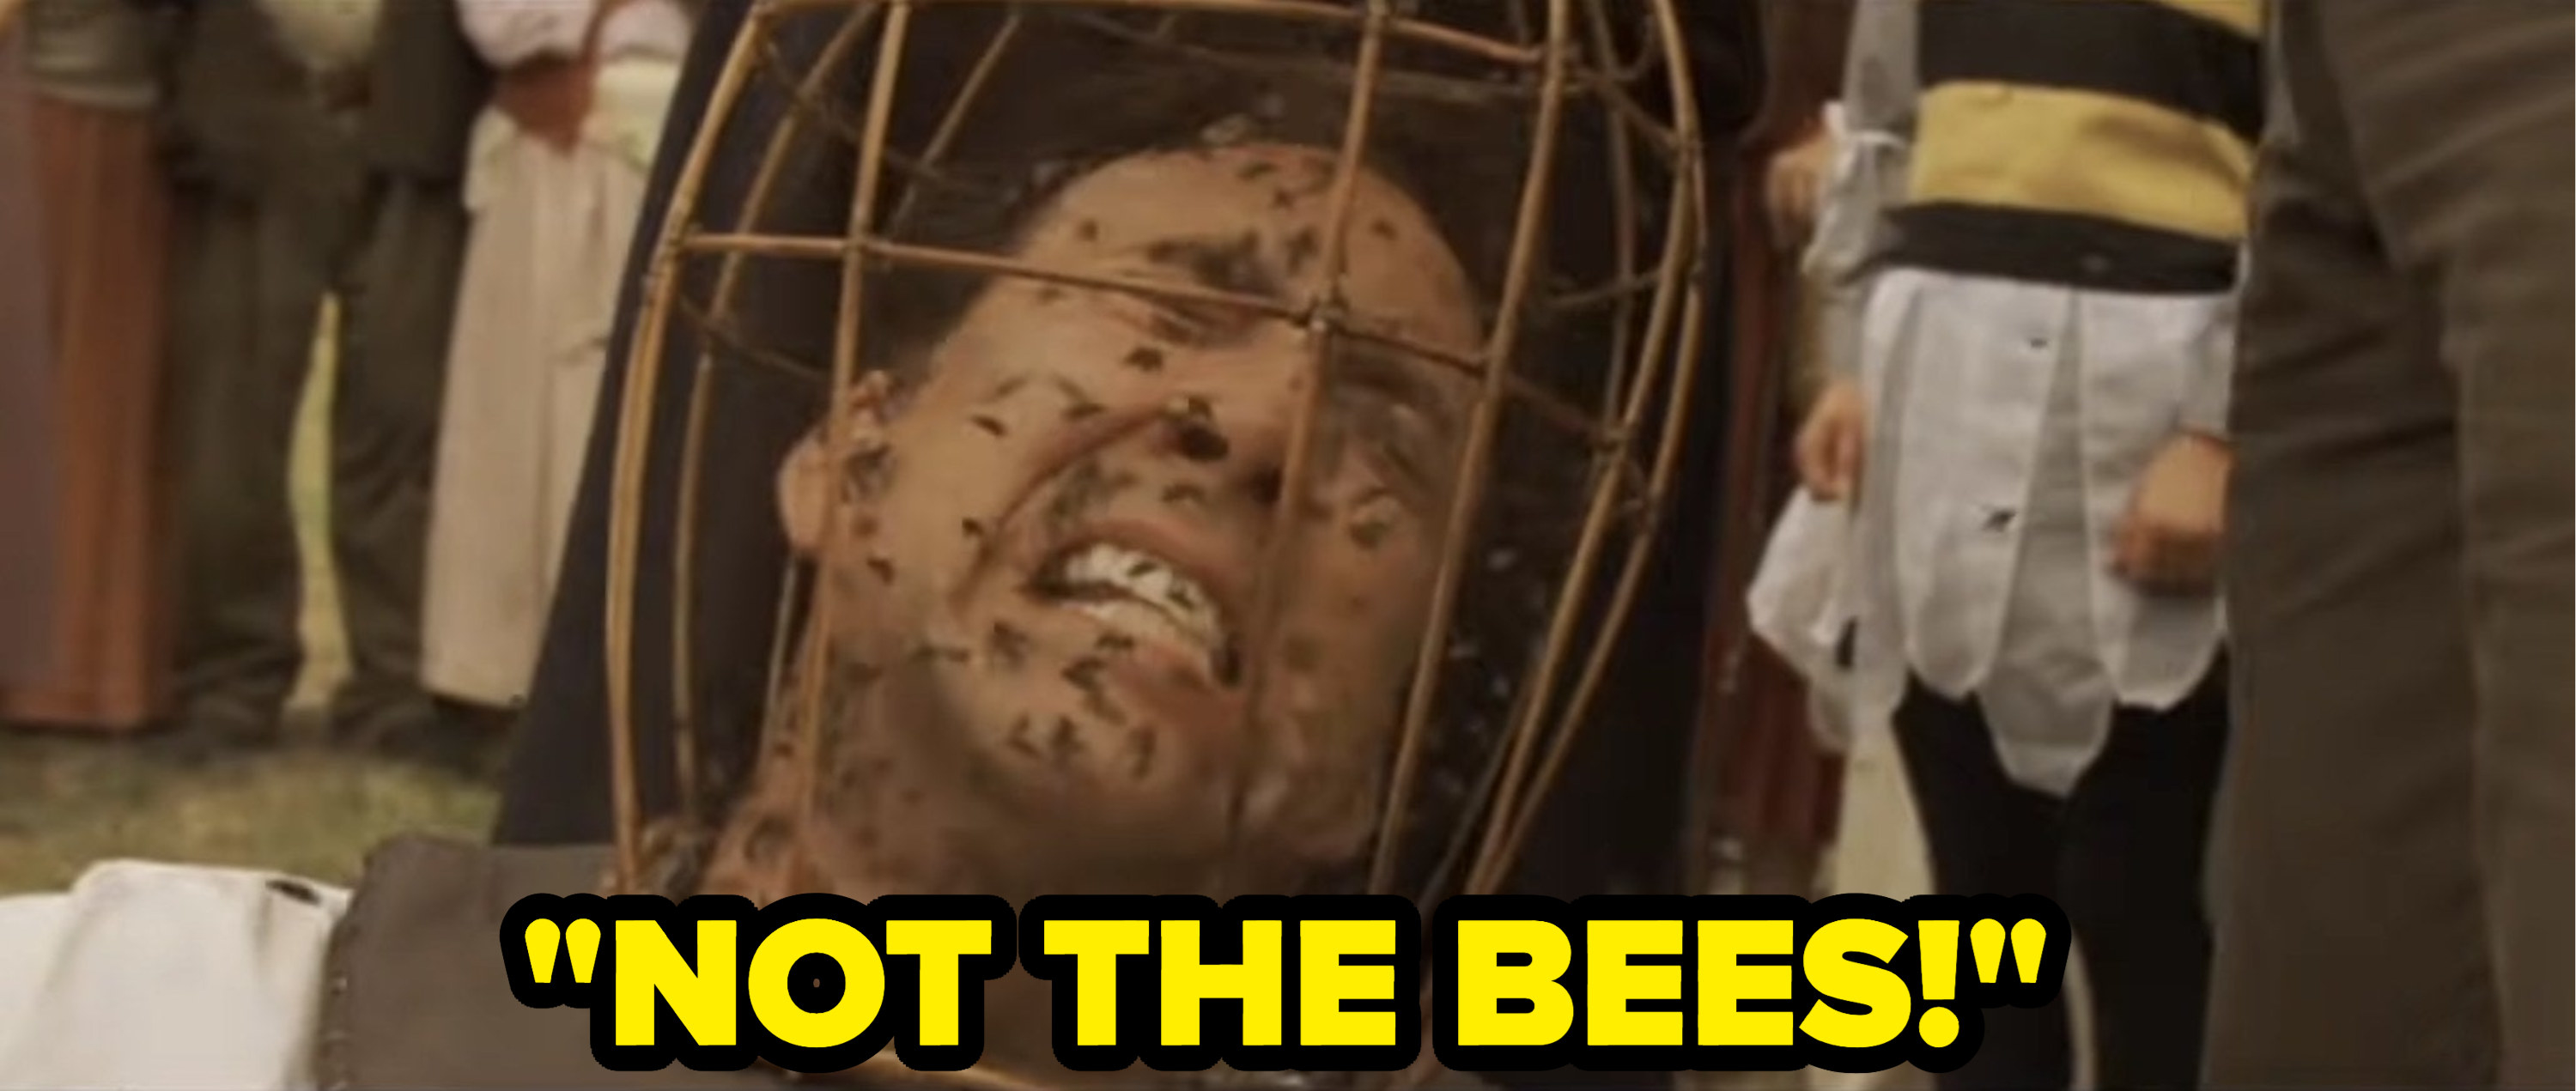 nicolas cage saying not the bees in wicker man